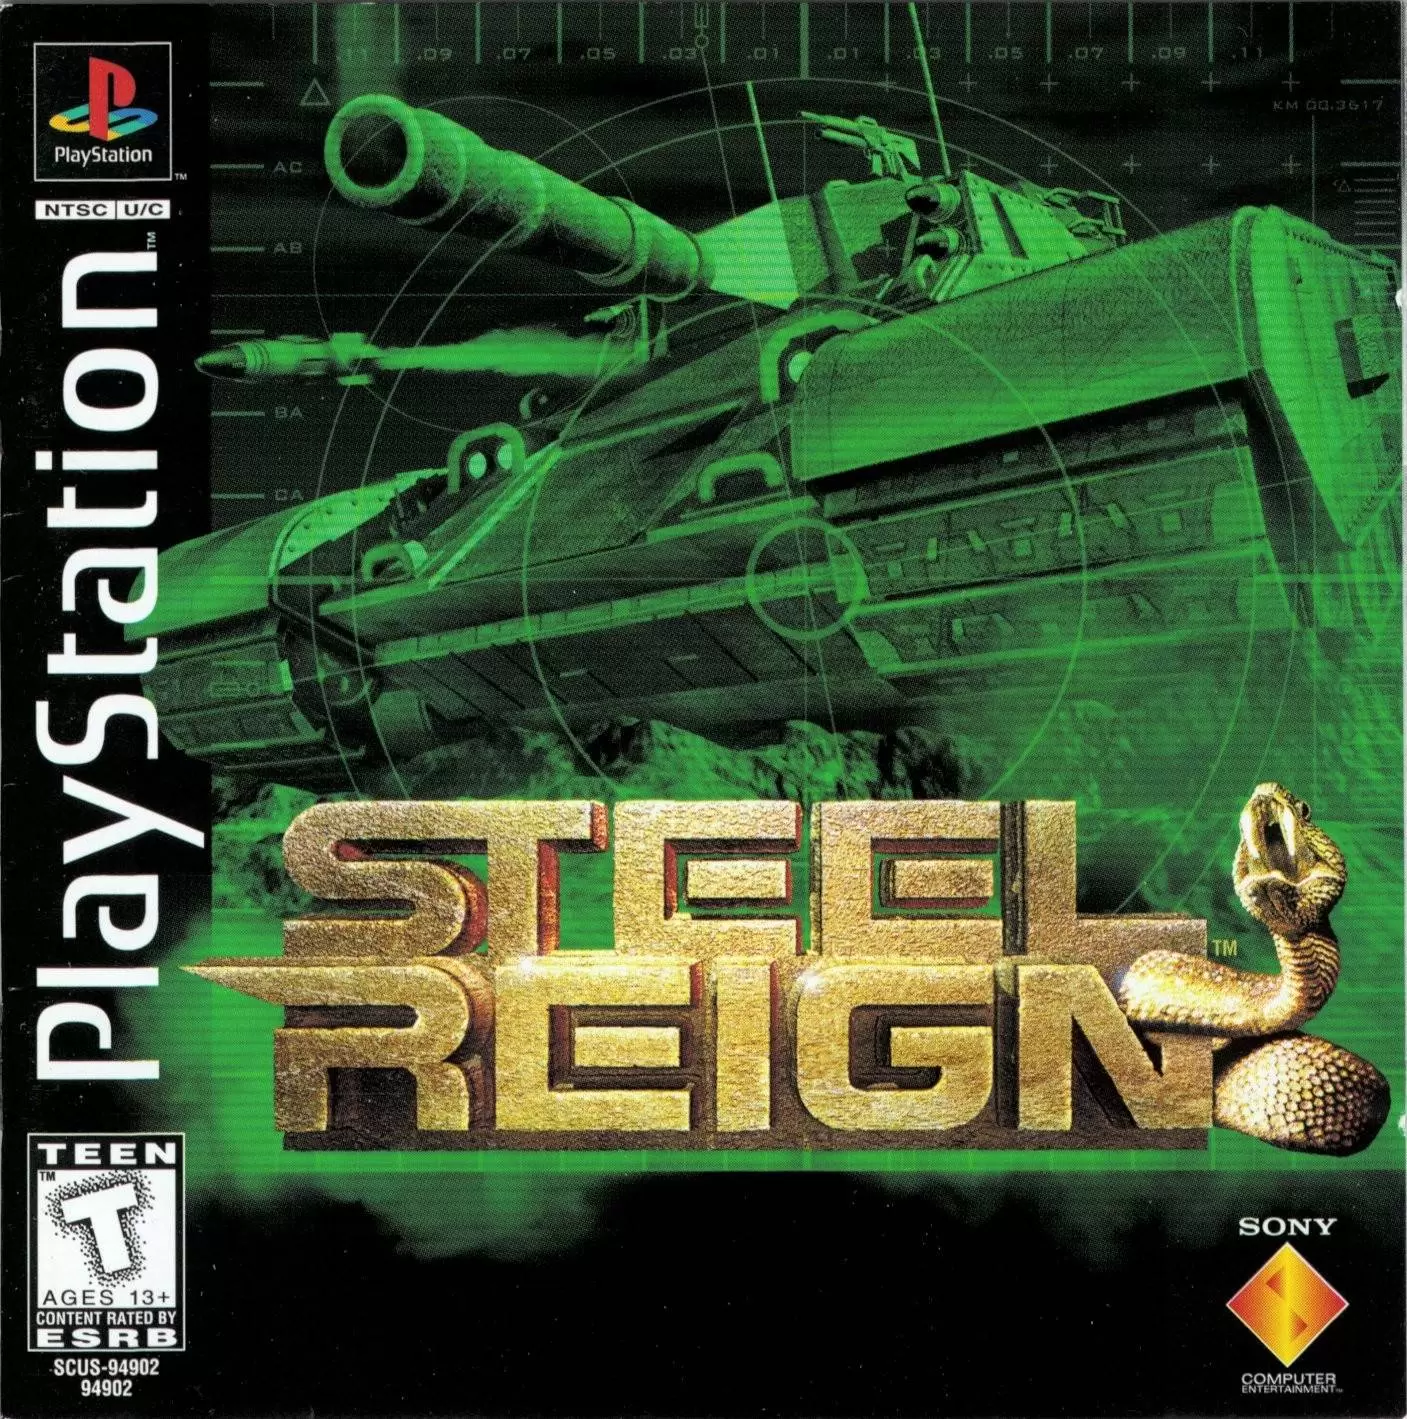 Playstation games - Steel Reign